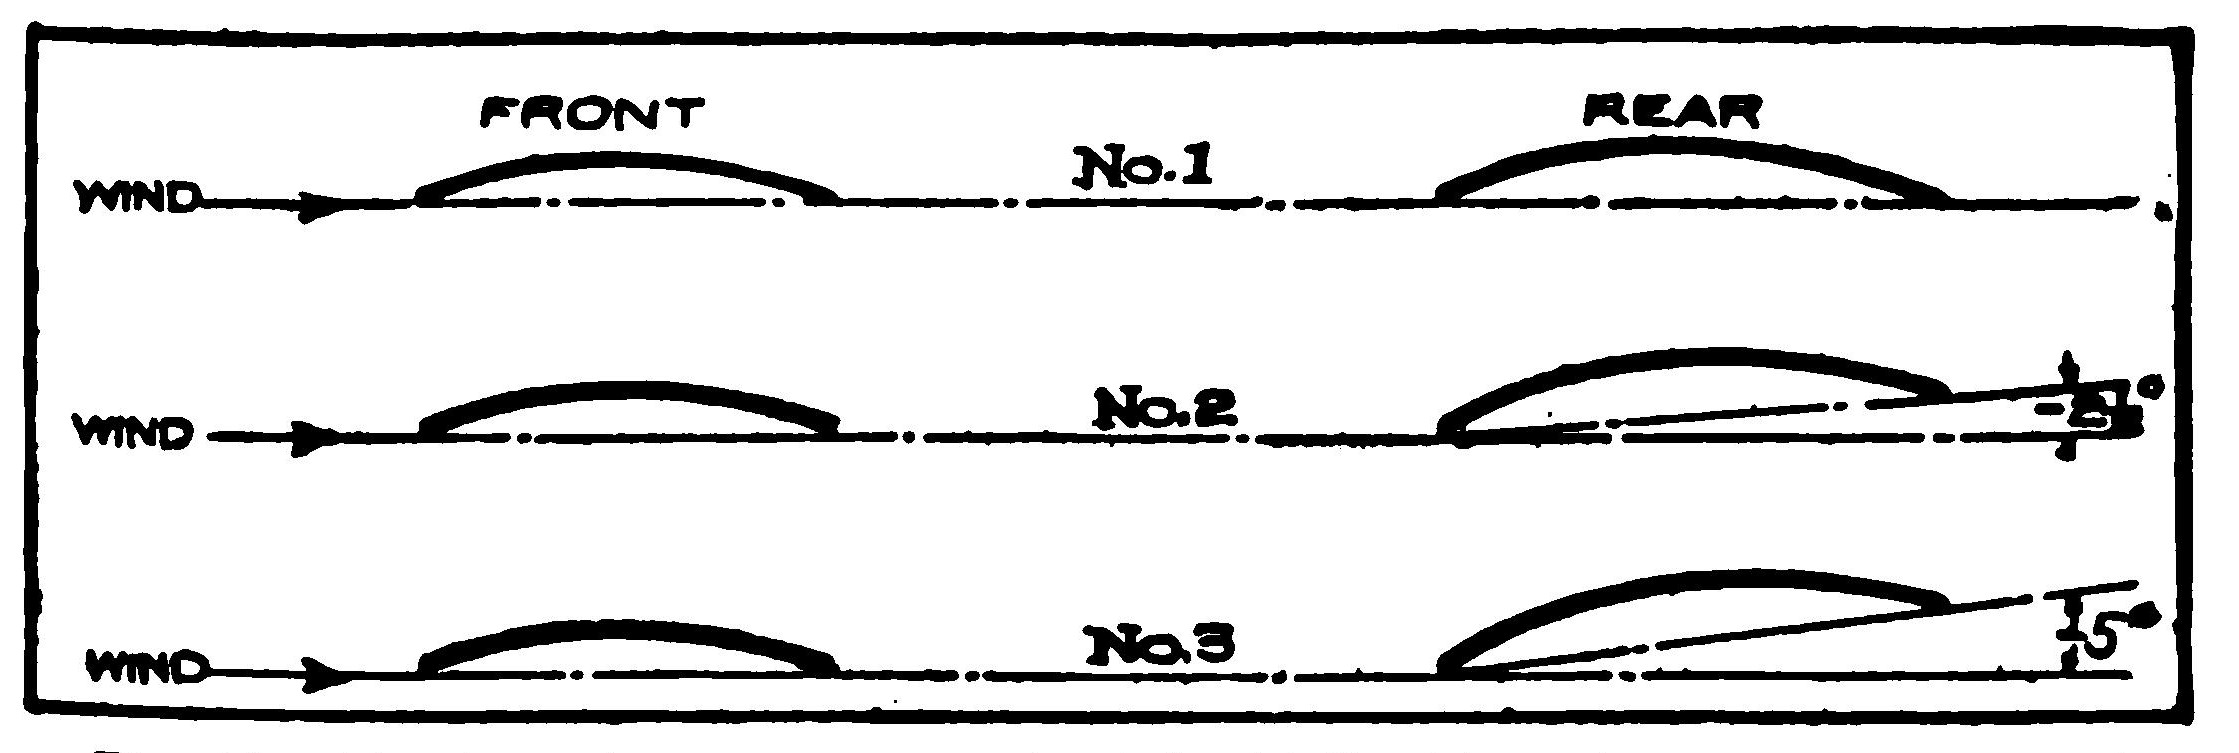 Fig. 12. Tandem Arrangements Used in Eiffel Experiments. (1) Chords in Straight Line, (2) Rear Wing at 2.5°, (3) Rear Wing at 5°.